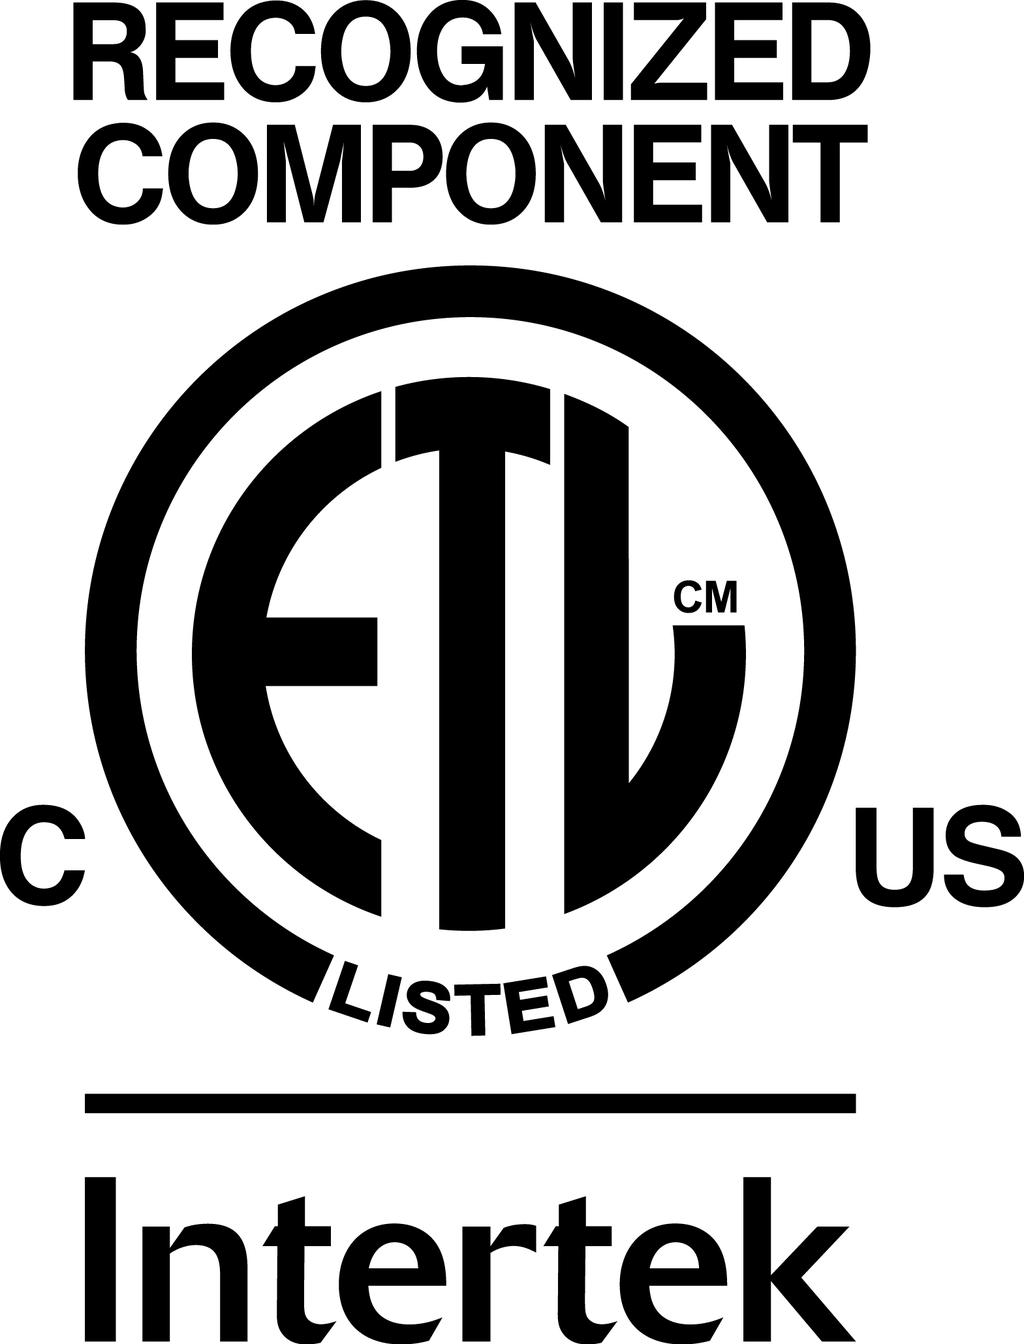 UL STD 1004-1 Certified to CSA STD C22.2 No. 100 ETL Control number 5003012 Official responsible for documentation: 1 FEB 2016 Standard Pump, Inc.